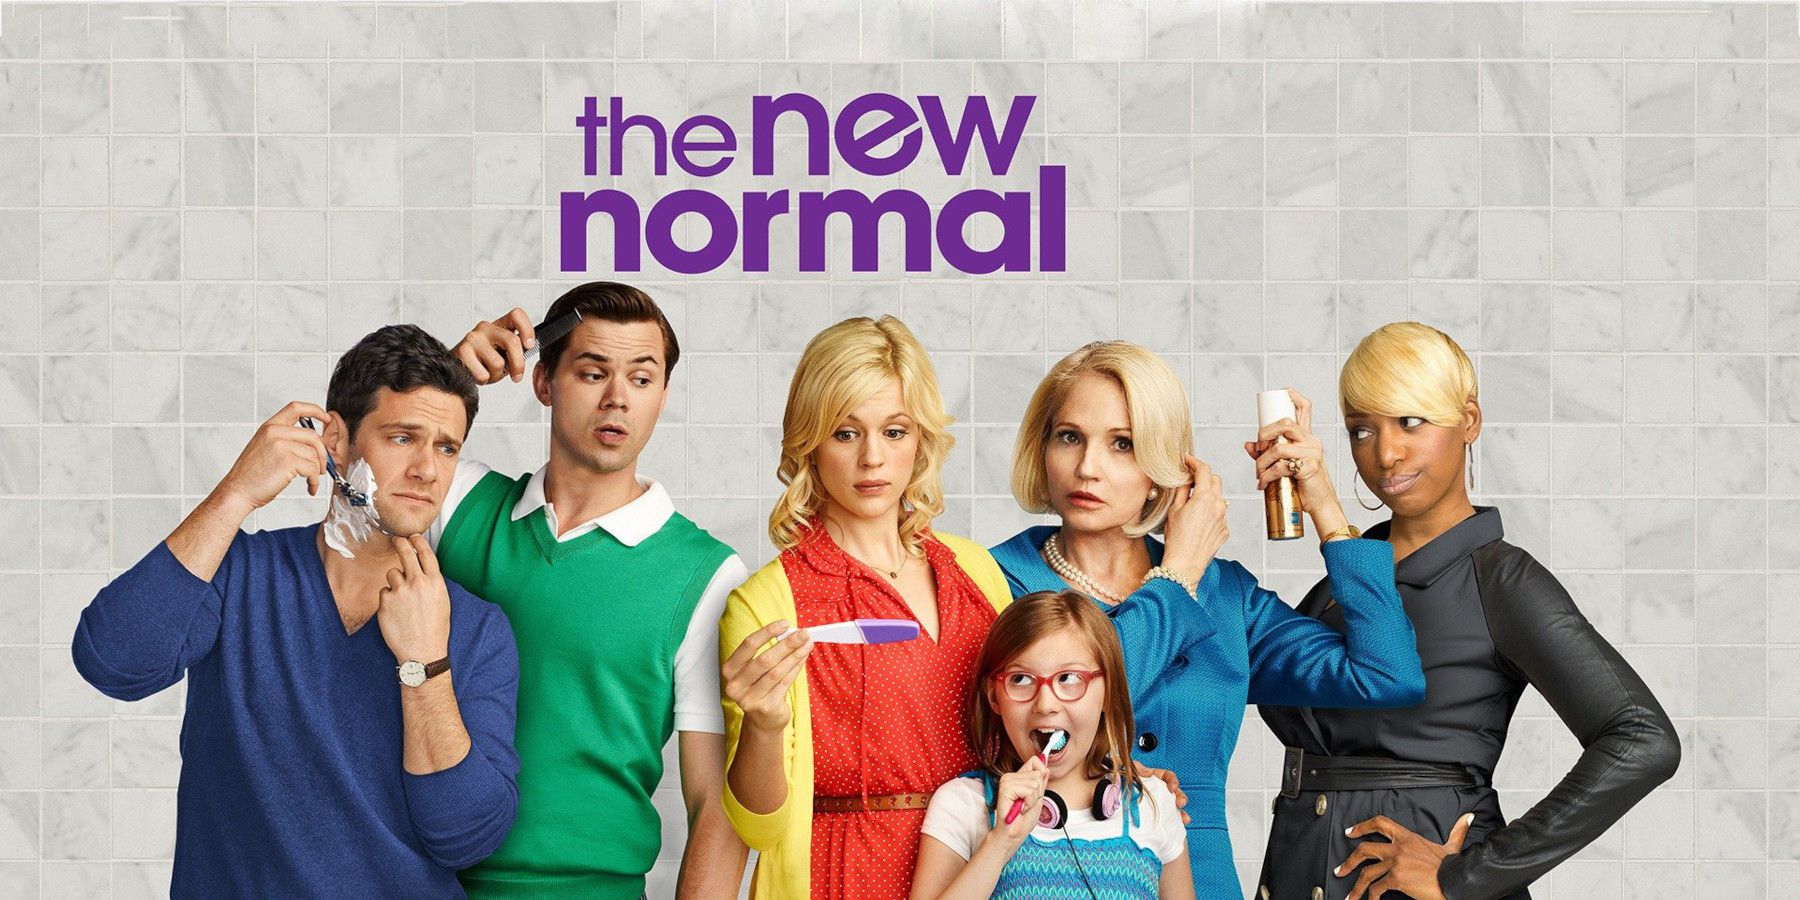 The cast of the sitcom, The New Normal, getting ready for their mornings